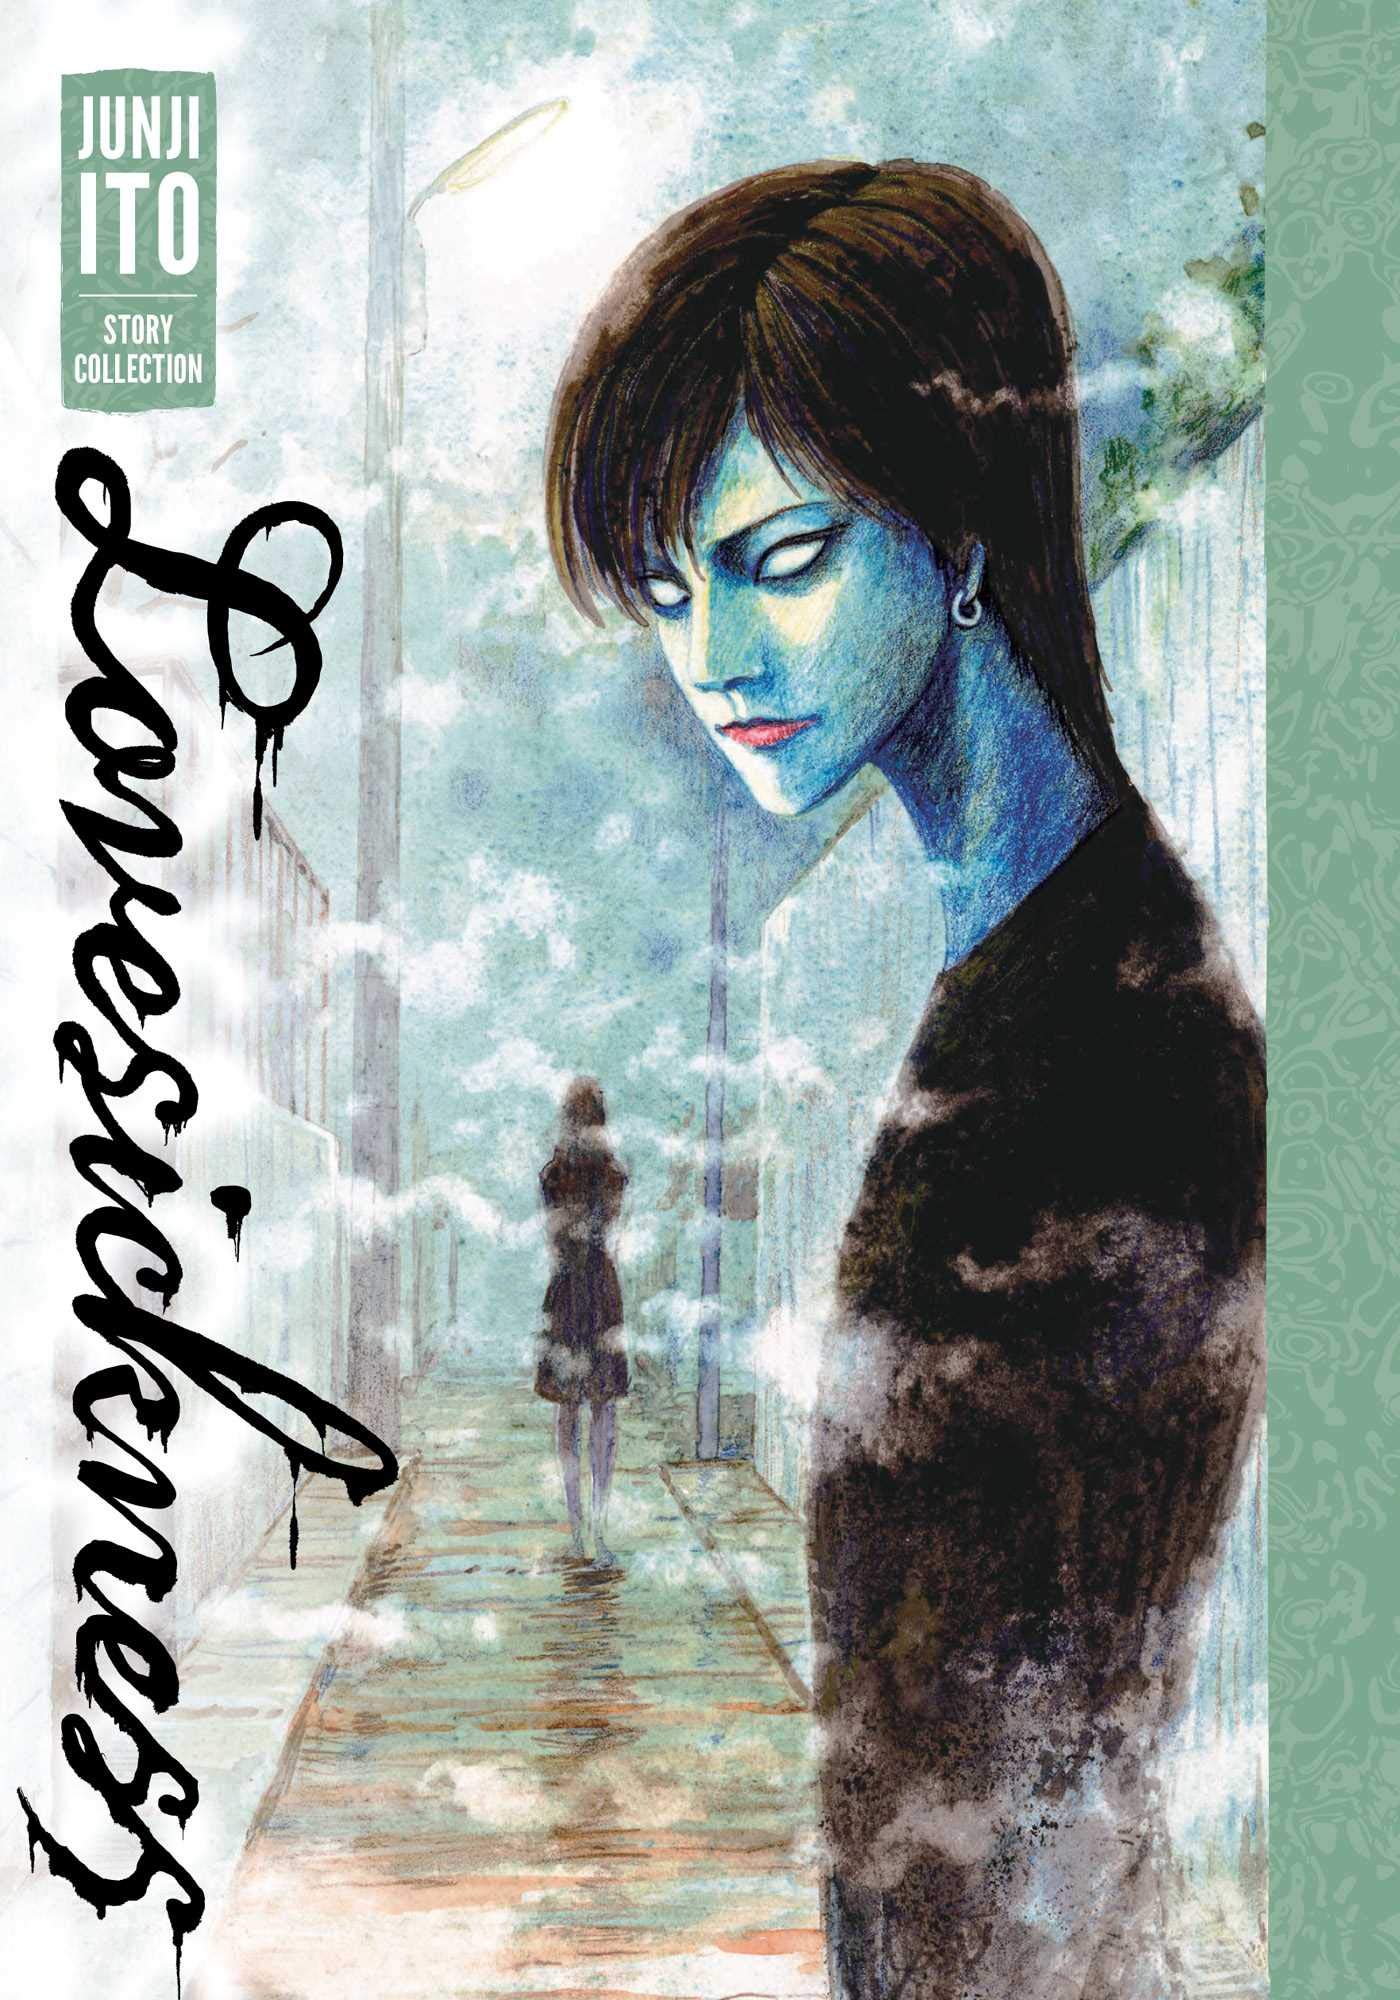 Junji Ito Story Collection Hardcover Volume 5 Lovesickness